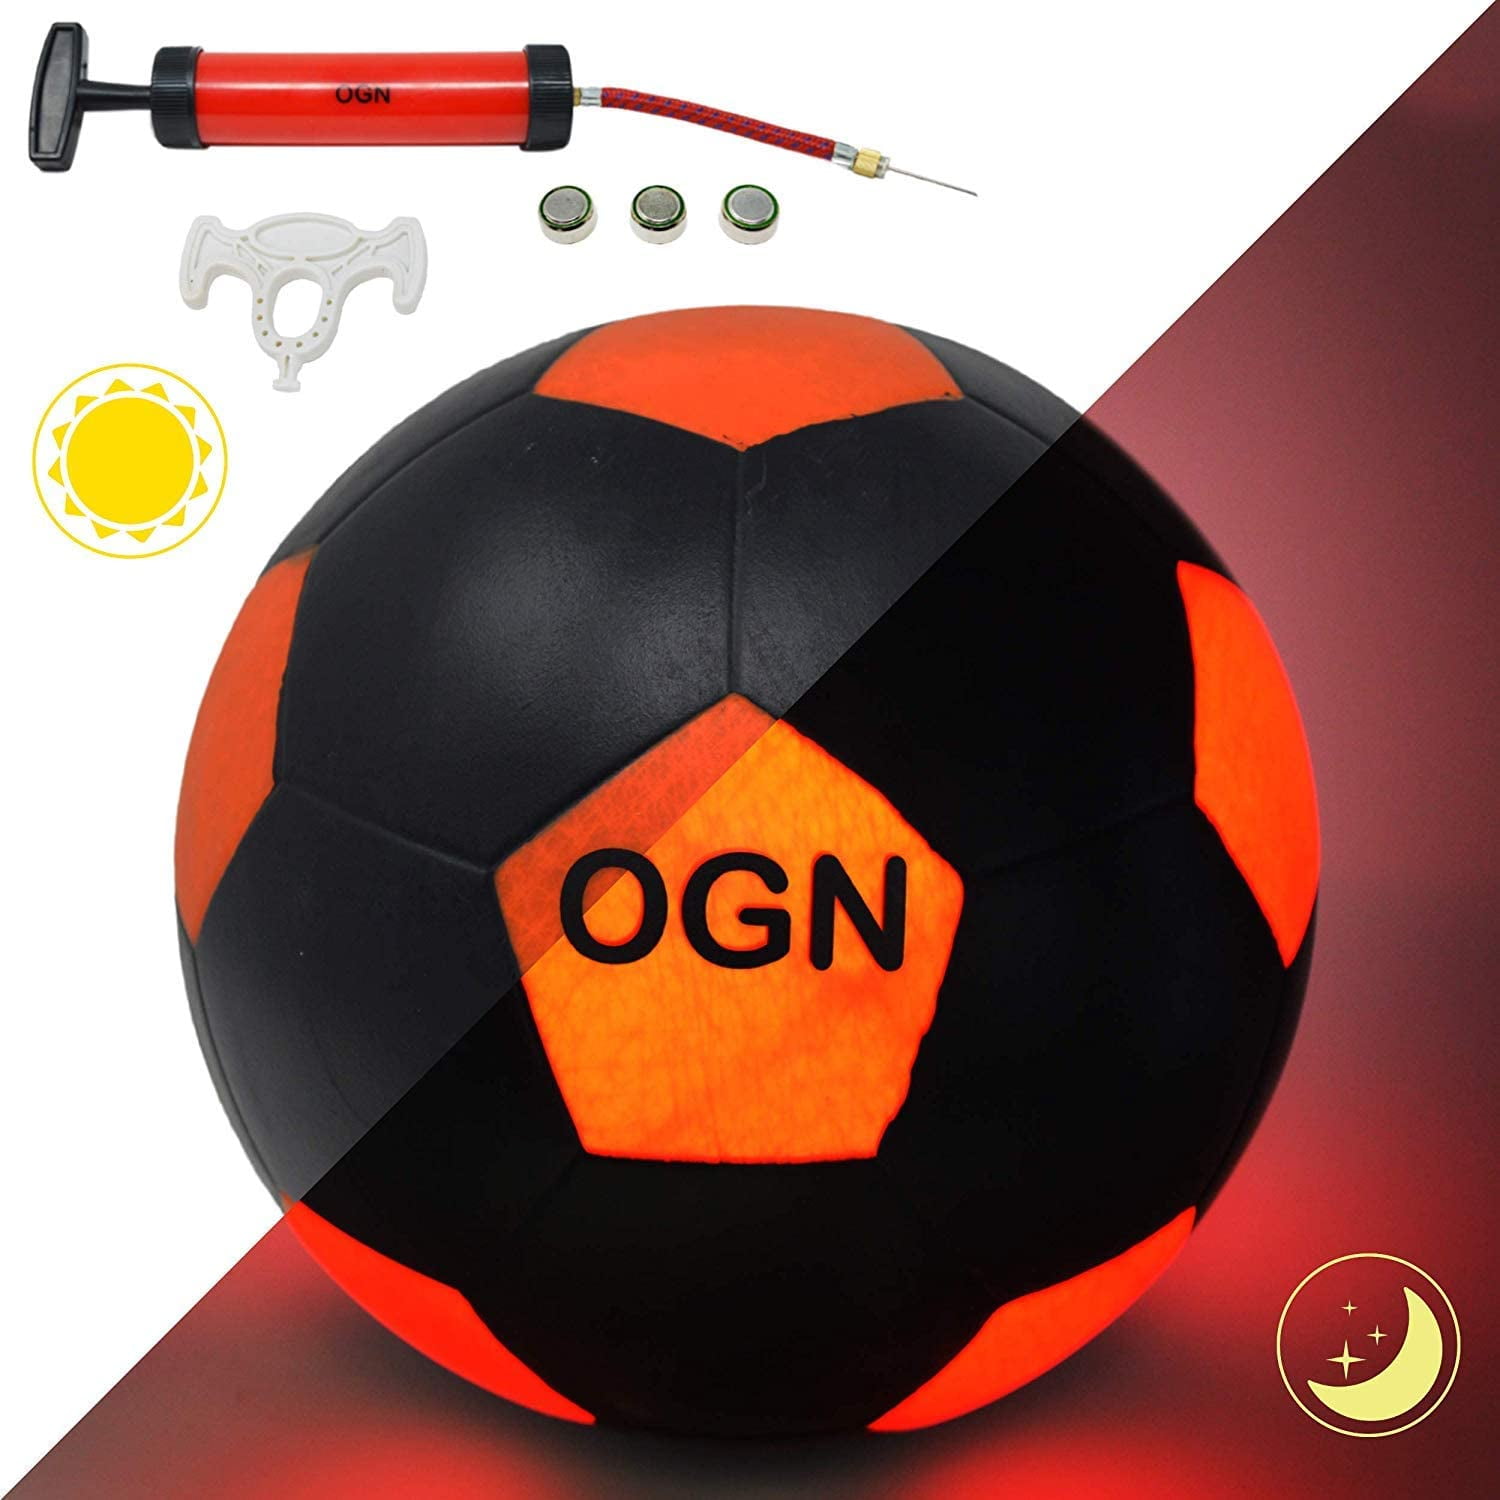 Outdoor Games LED Soccer Ball with Pump and Bag Light Up The Night with The Glow in The Dark Soccer Ball Button Activated